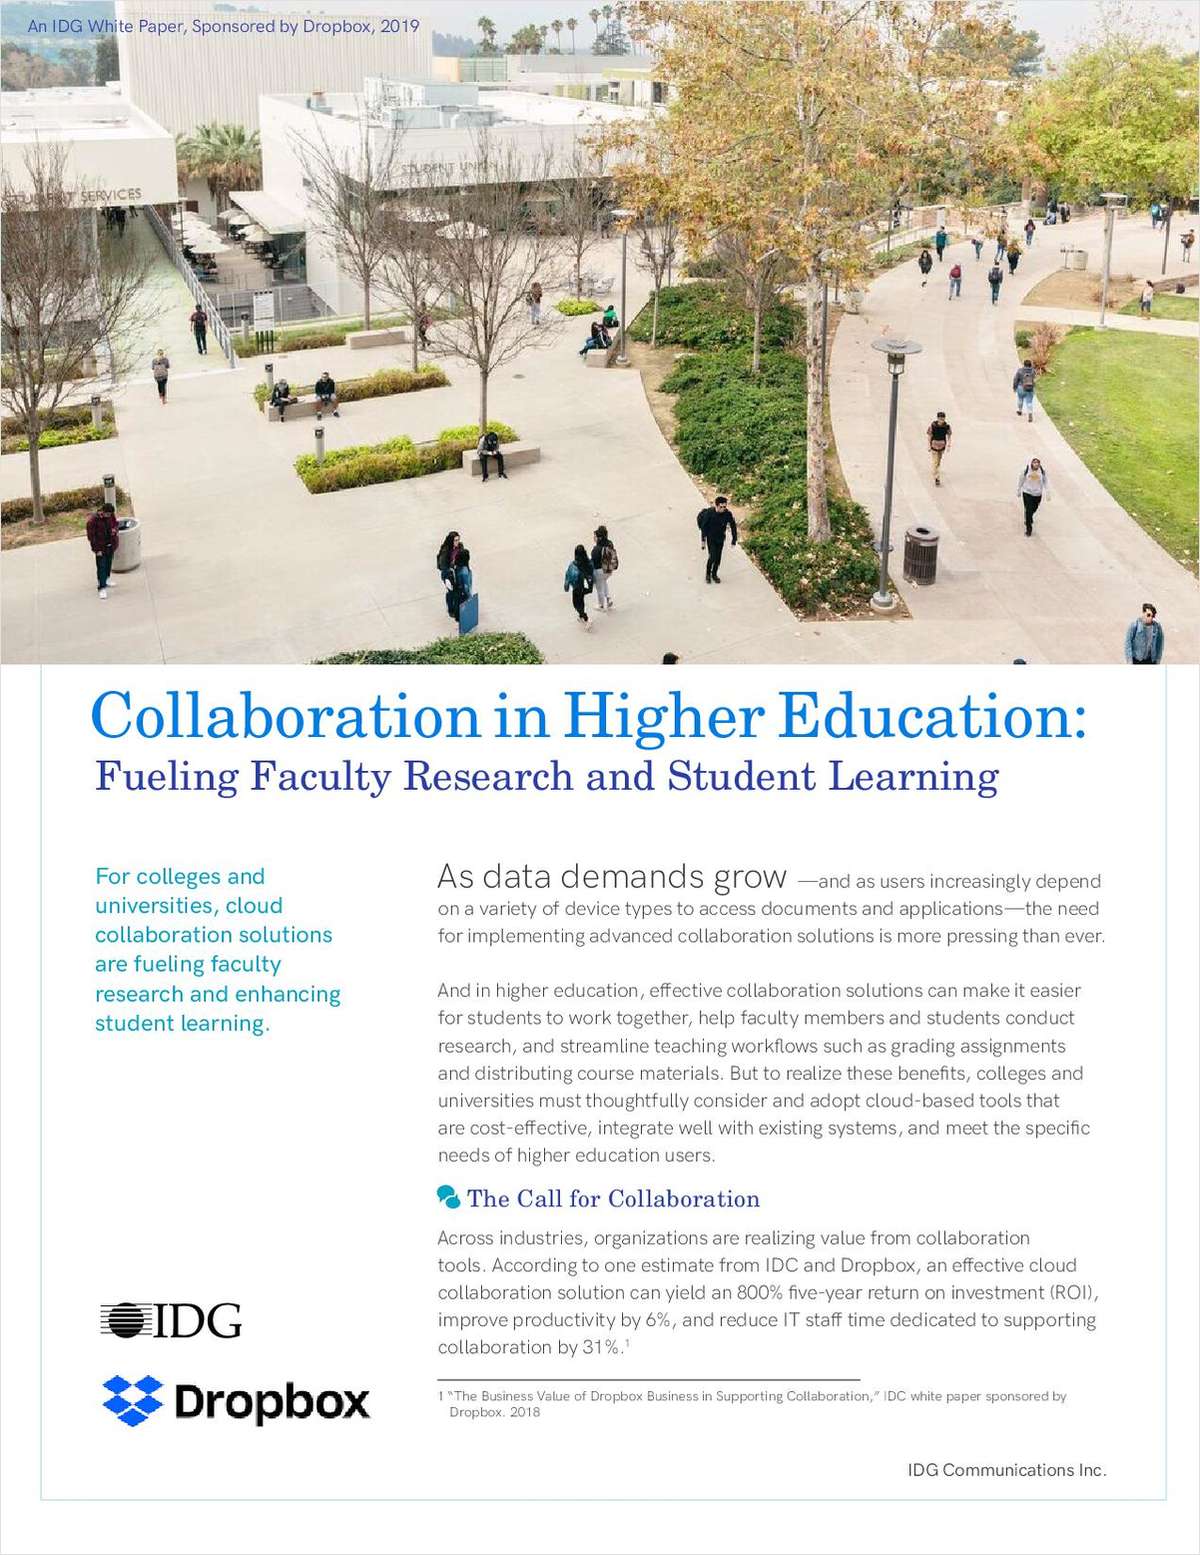 Collaboration in Higher Education: Fueling Faculty Research and Student Learning